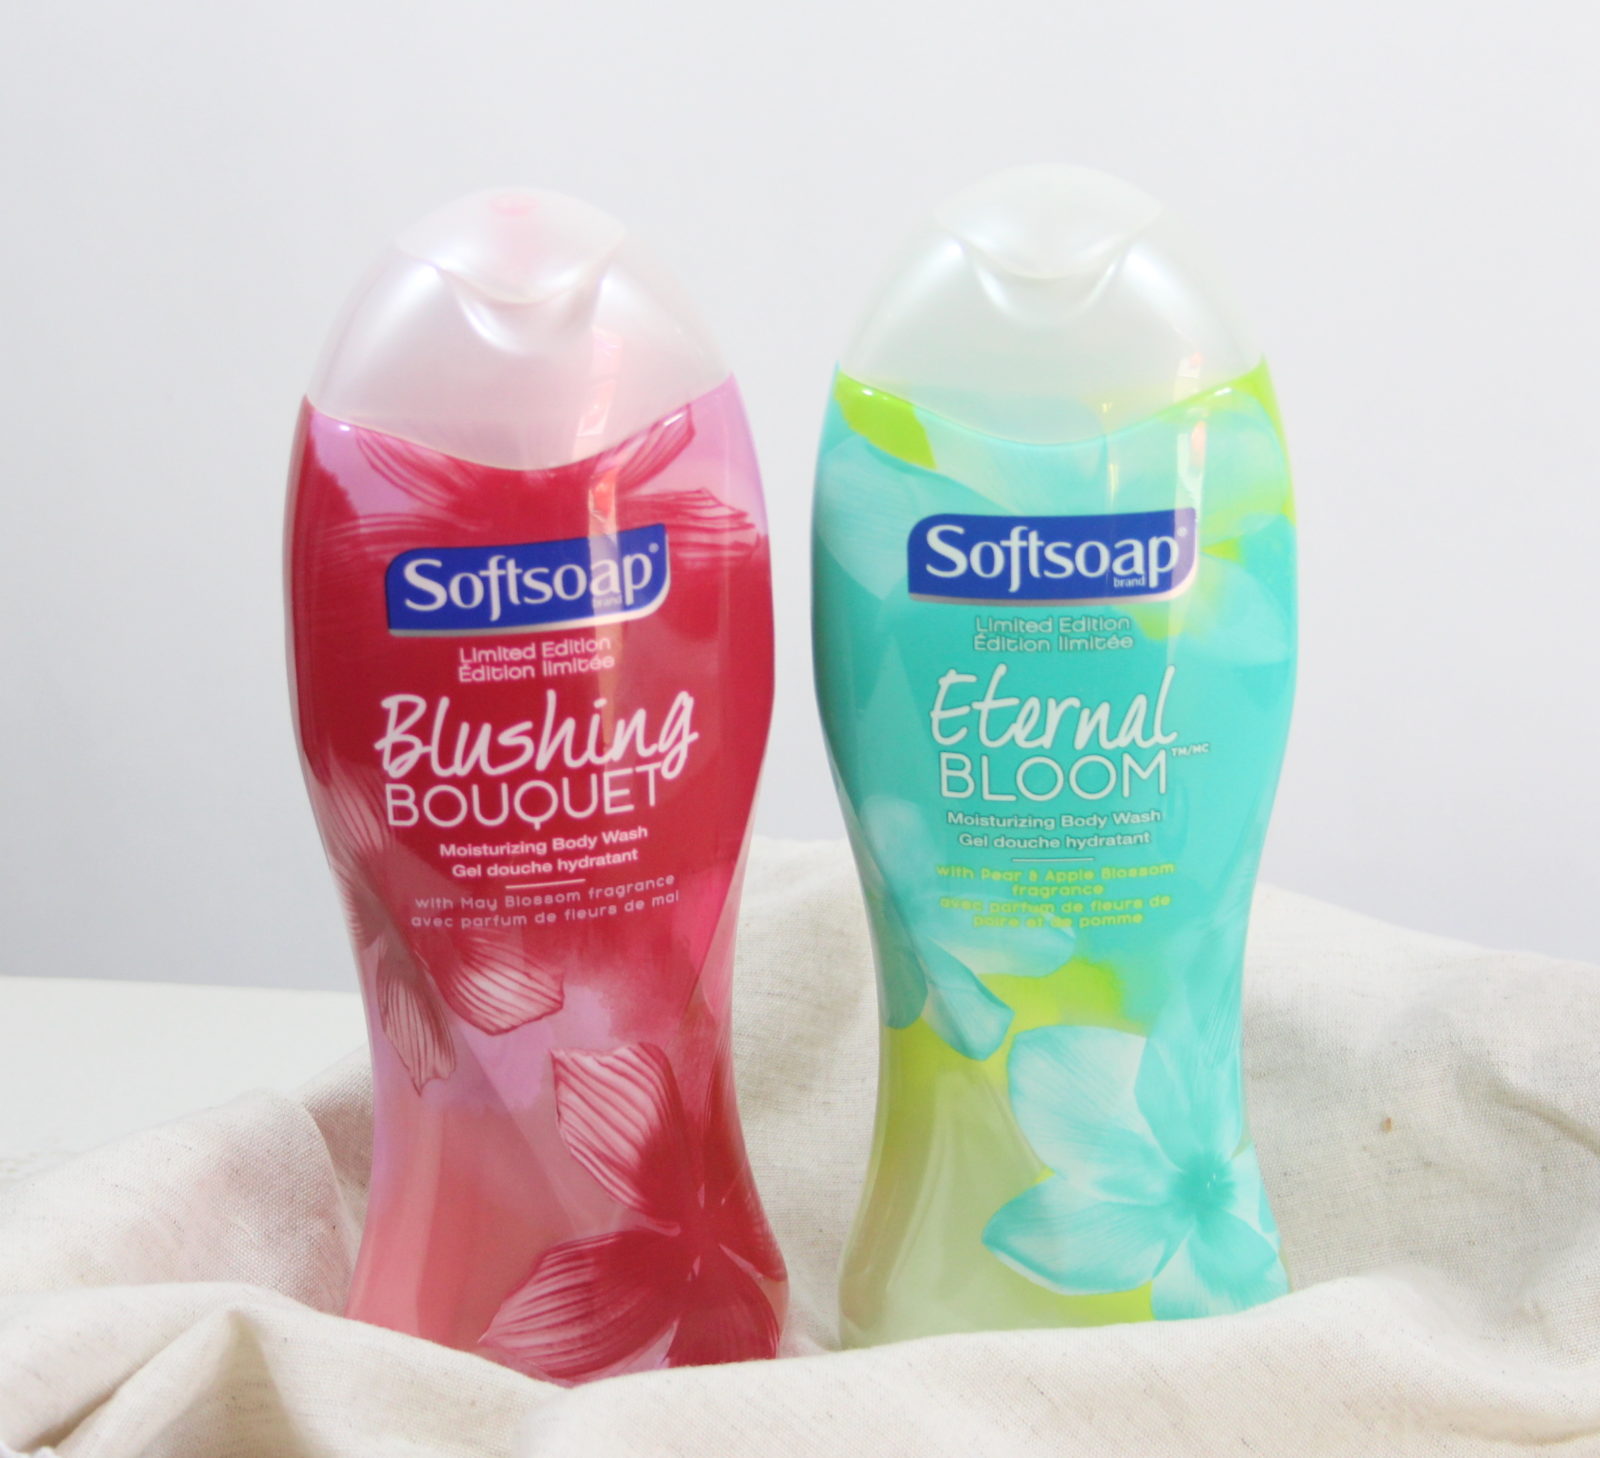 SoftSoap Limited Edition Body Wash